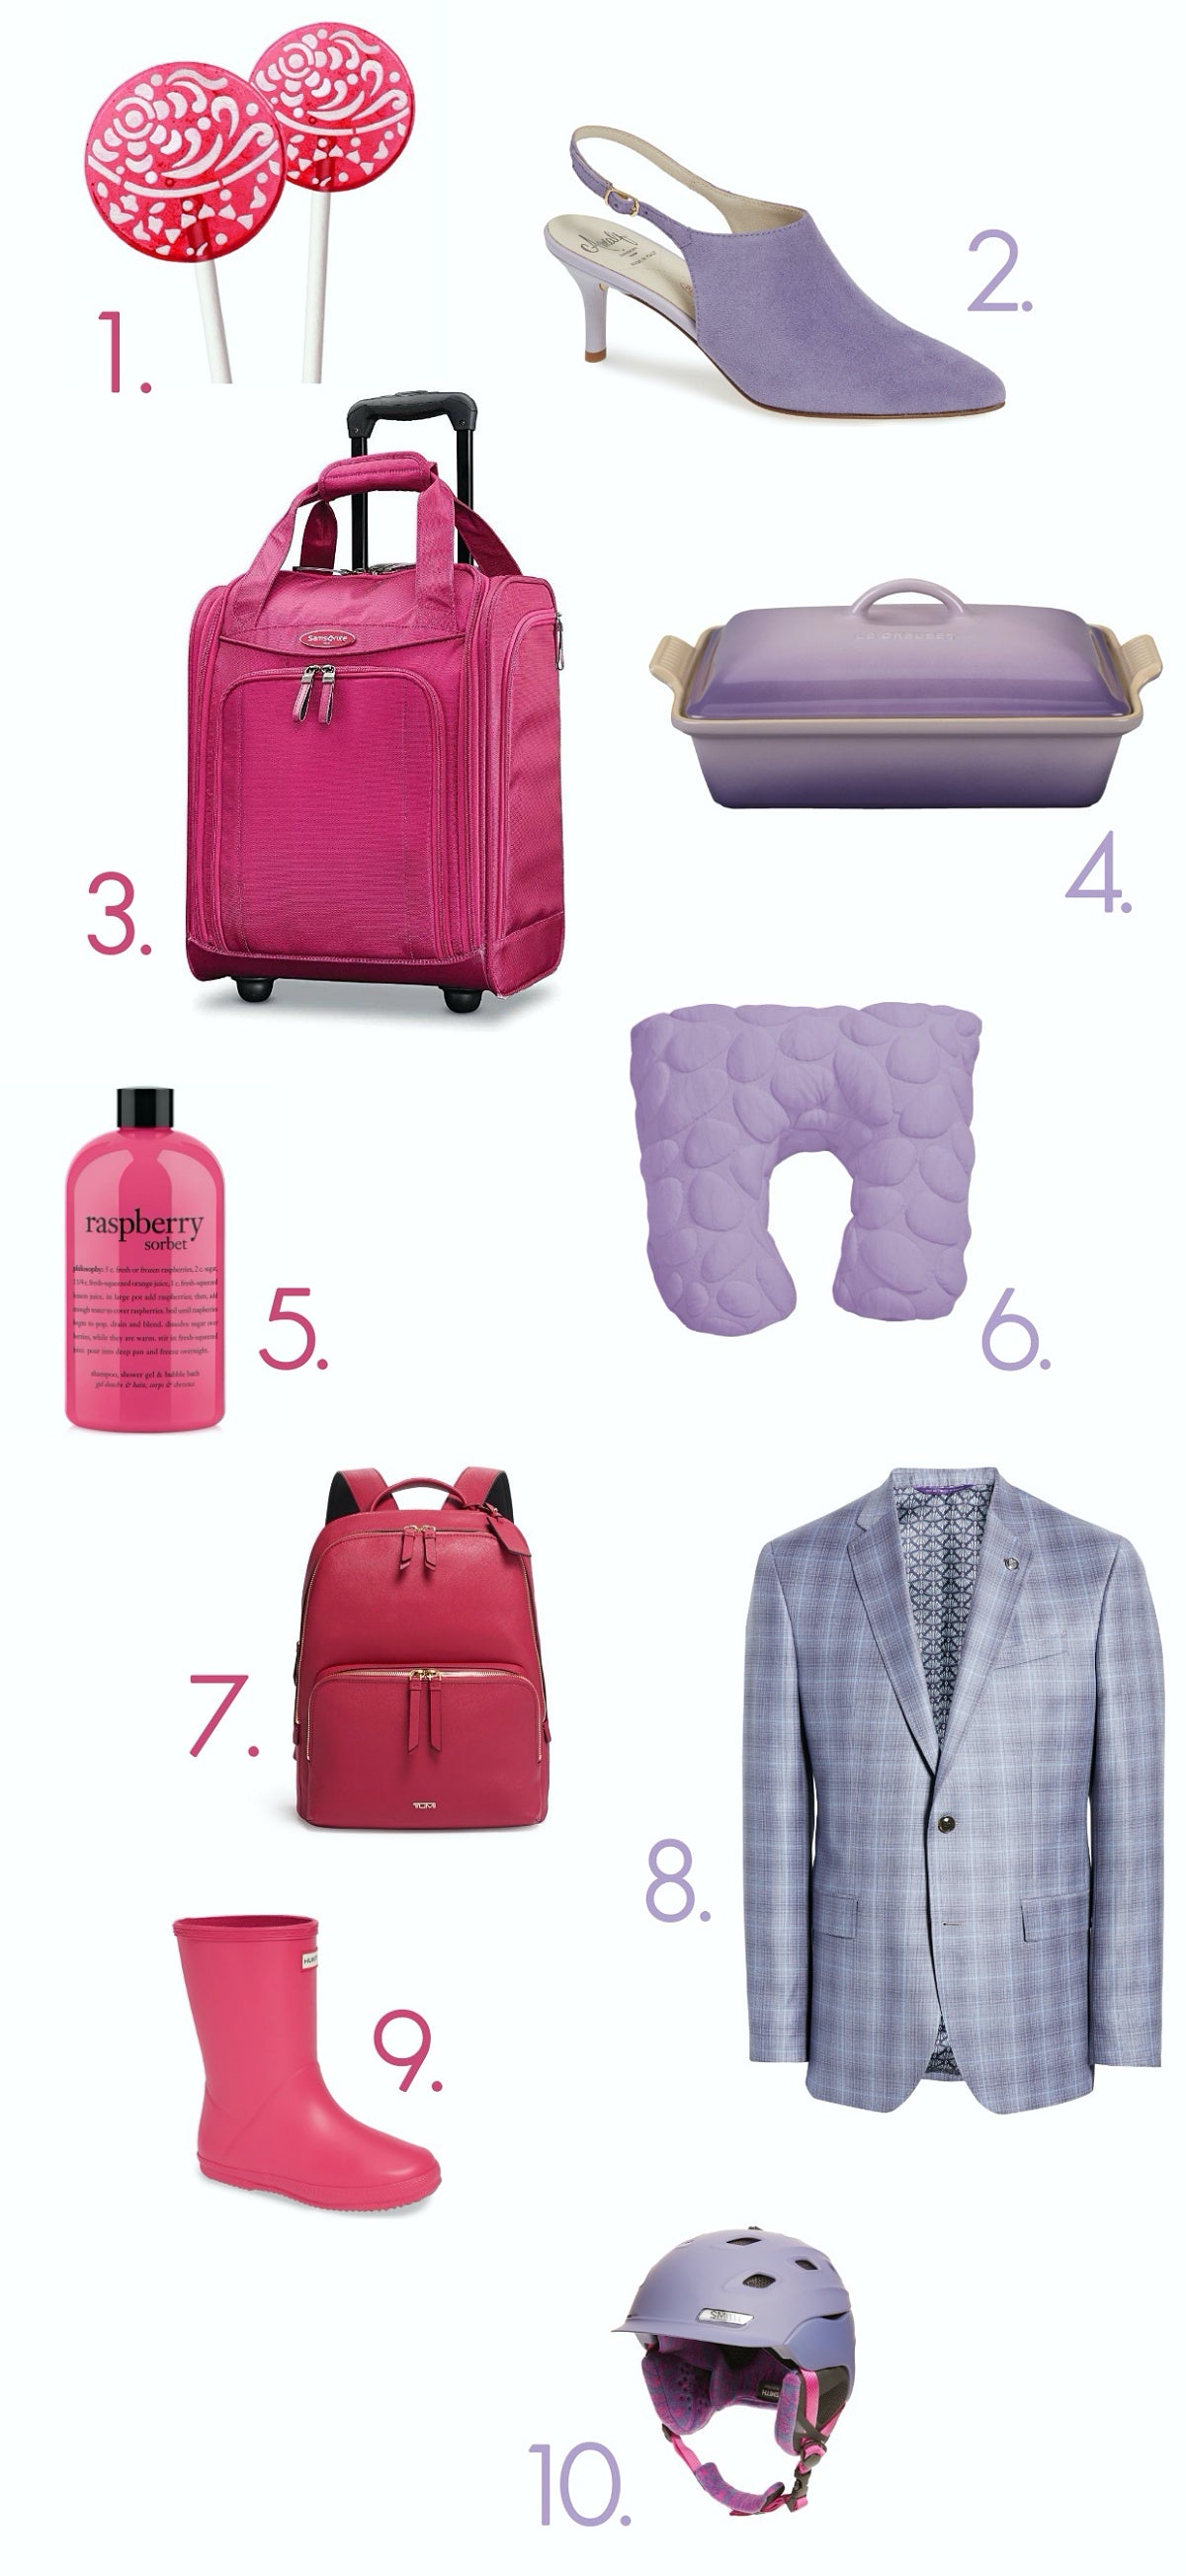 Color Craze Holiday Gift Guide - Raspberry Sorbet and Purple Rose